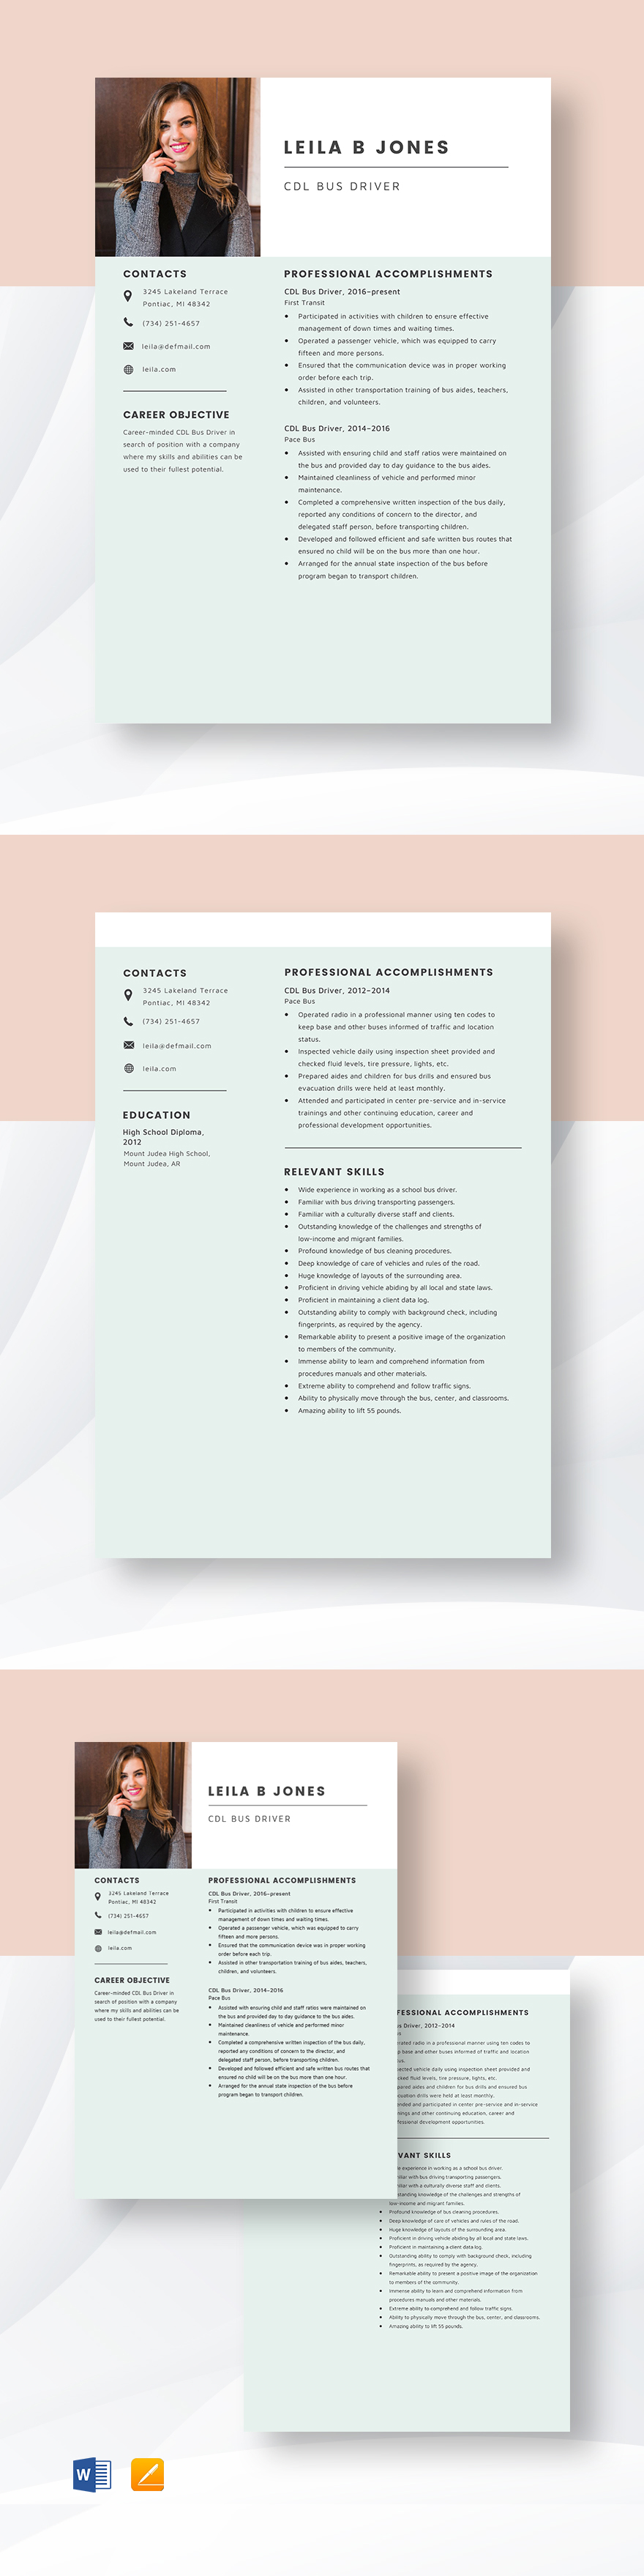 CDL Bus Driver Resume Template